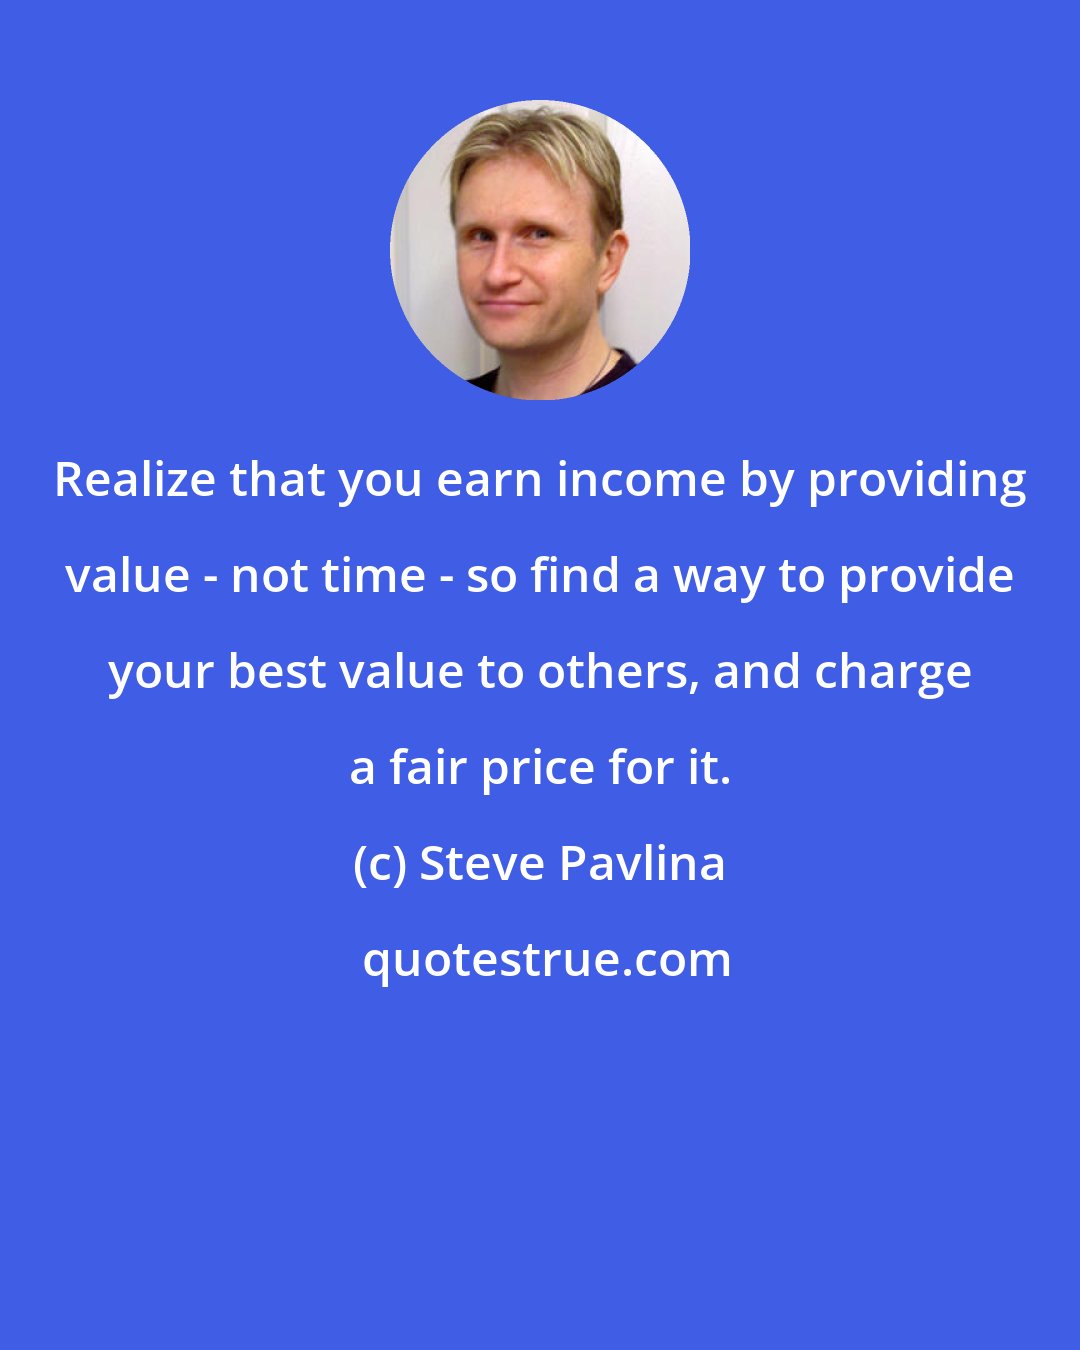 Steve Pavlina: Realize that you earn income by providing value - not time - so find a way to provide your best value to others, and charge a fair price for it.